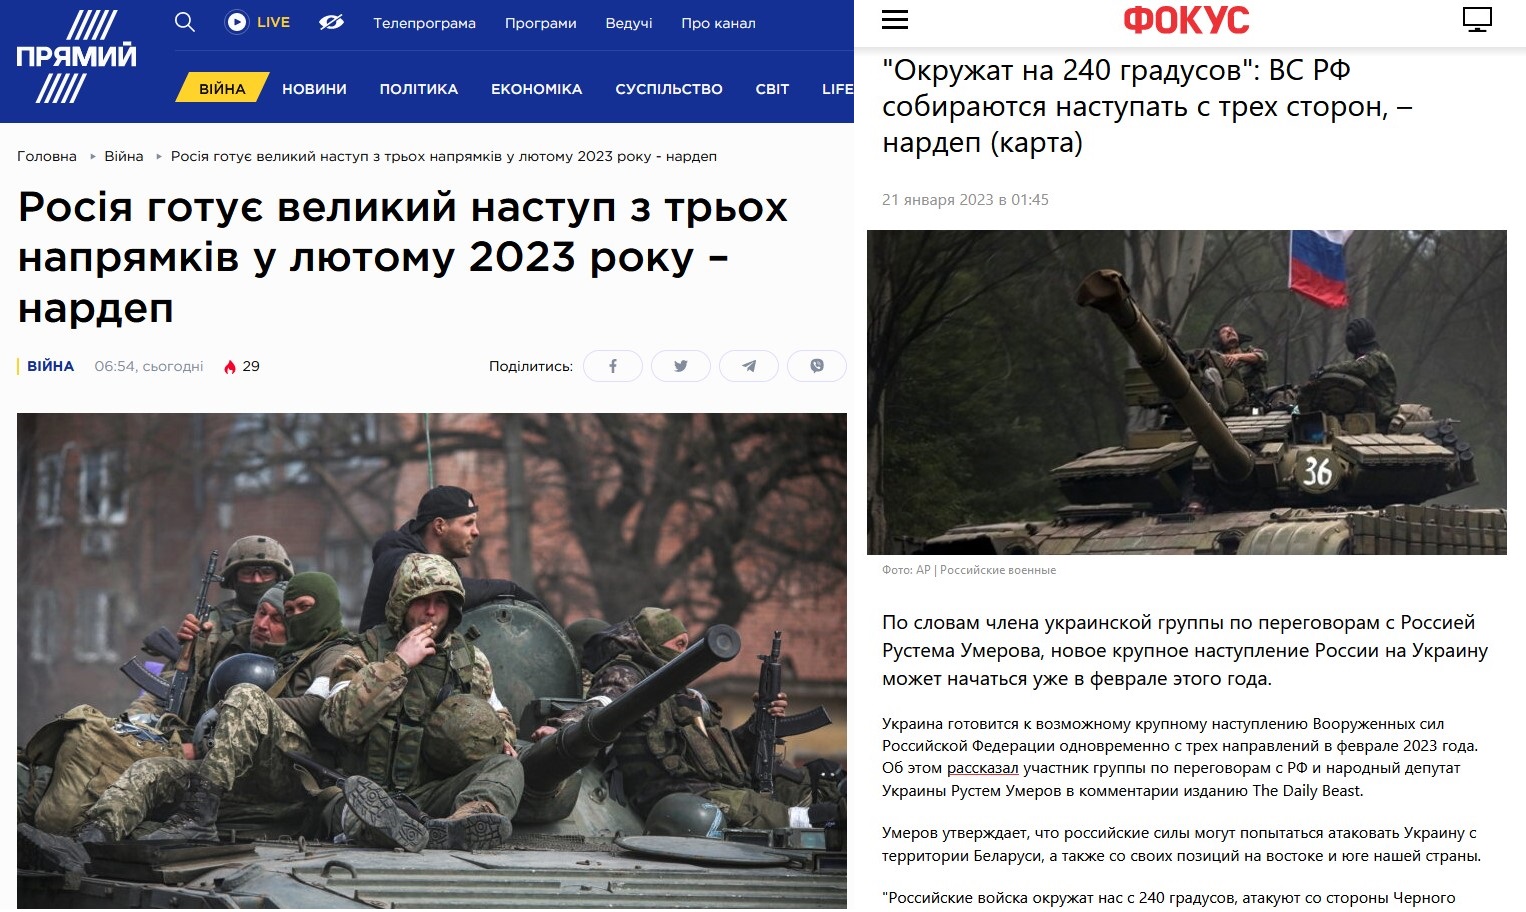 The Ukrainian media massively spread the fake about the "Russian offensive from three directions" in February 2023;